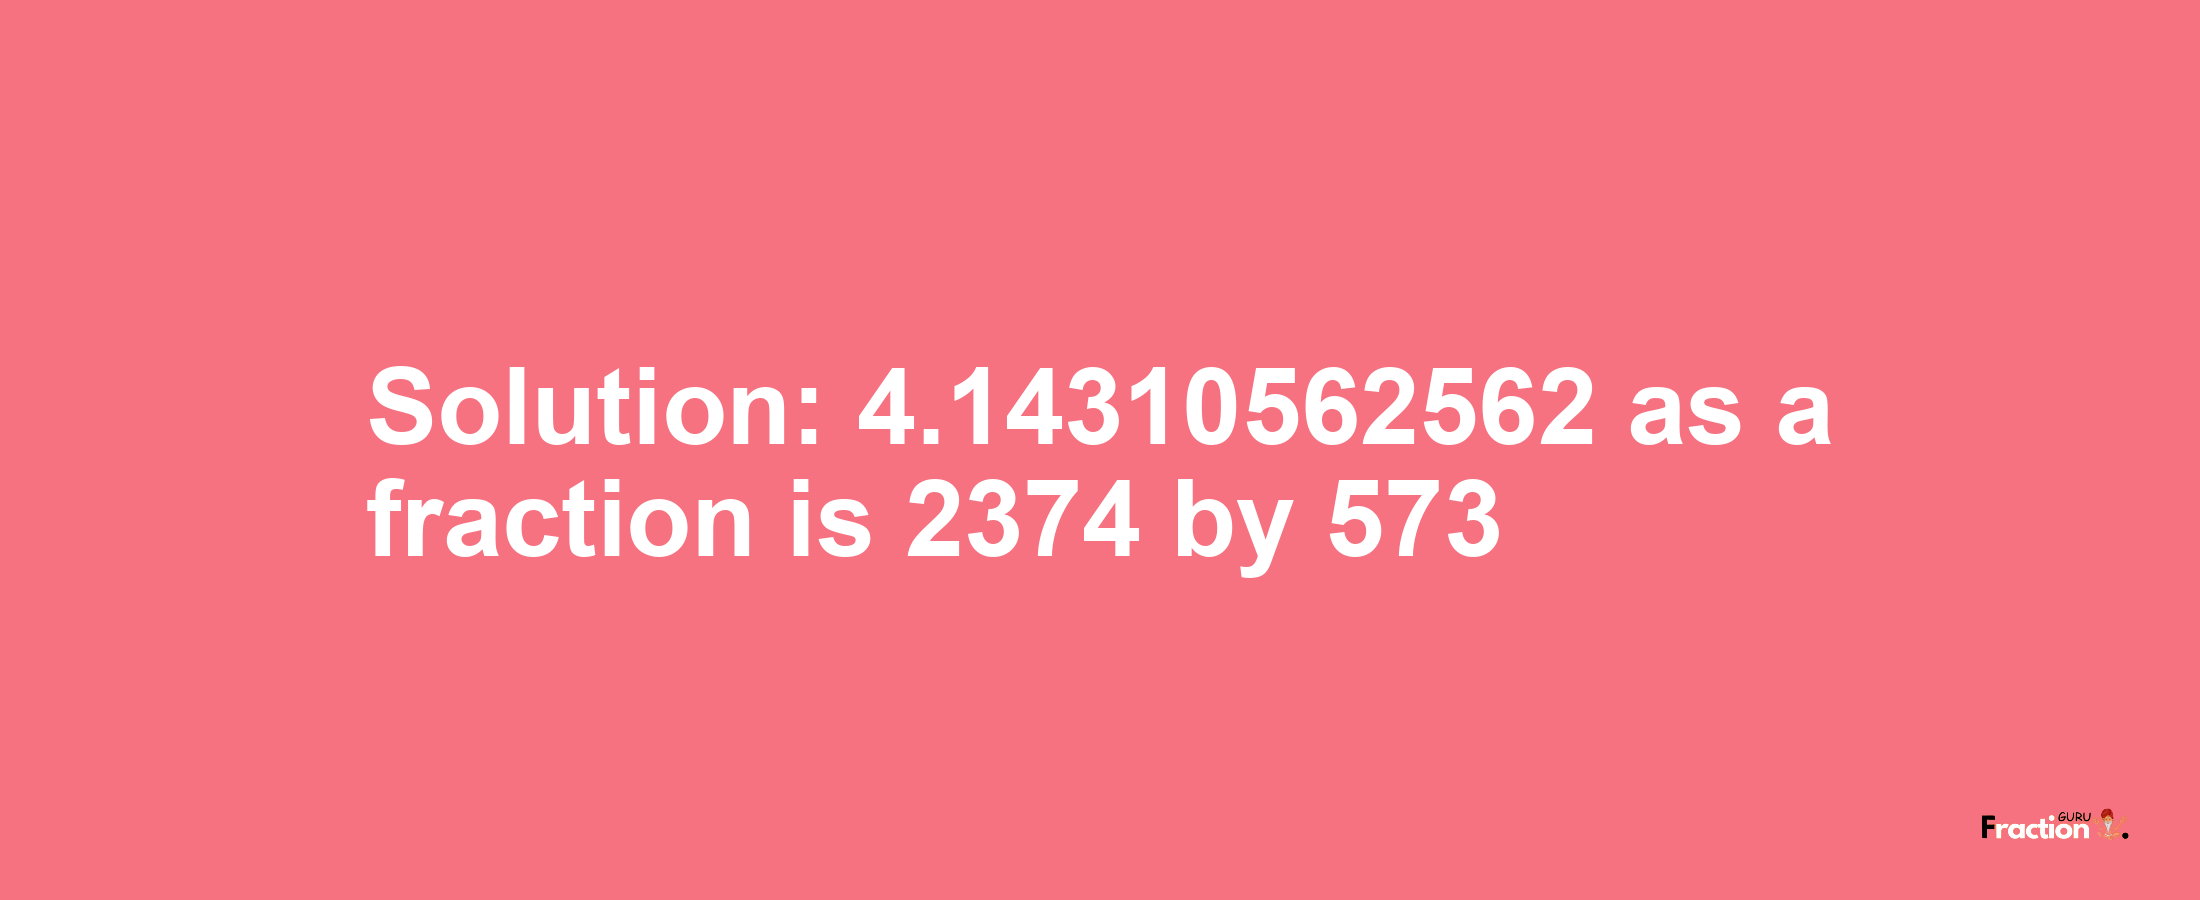 Solution:4.14310562562 as a fraction is 2374/573